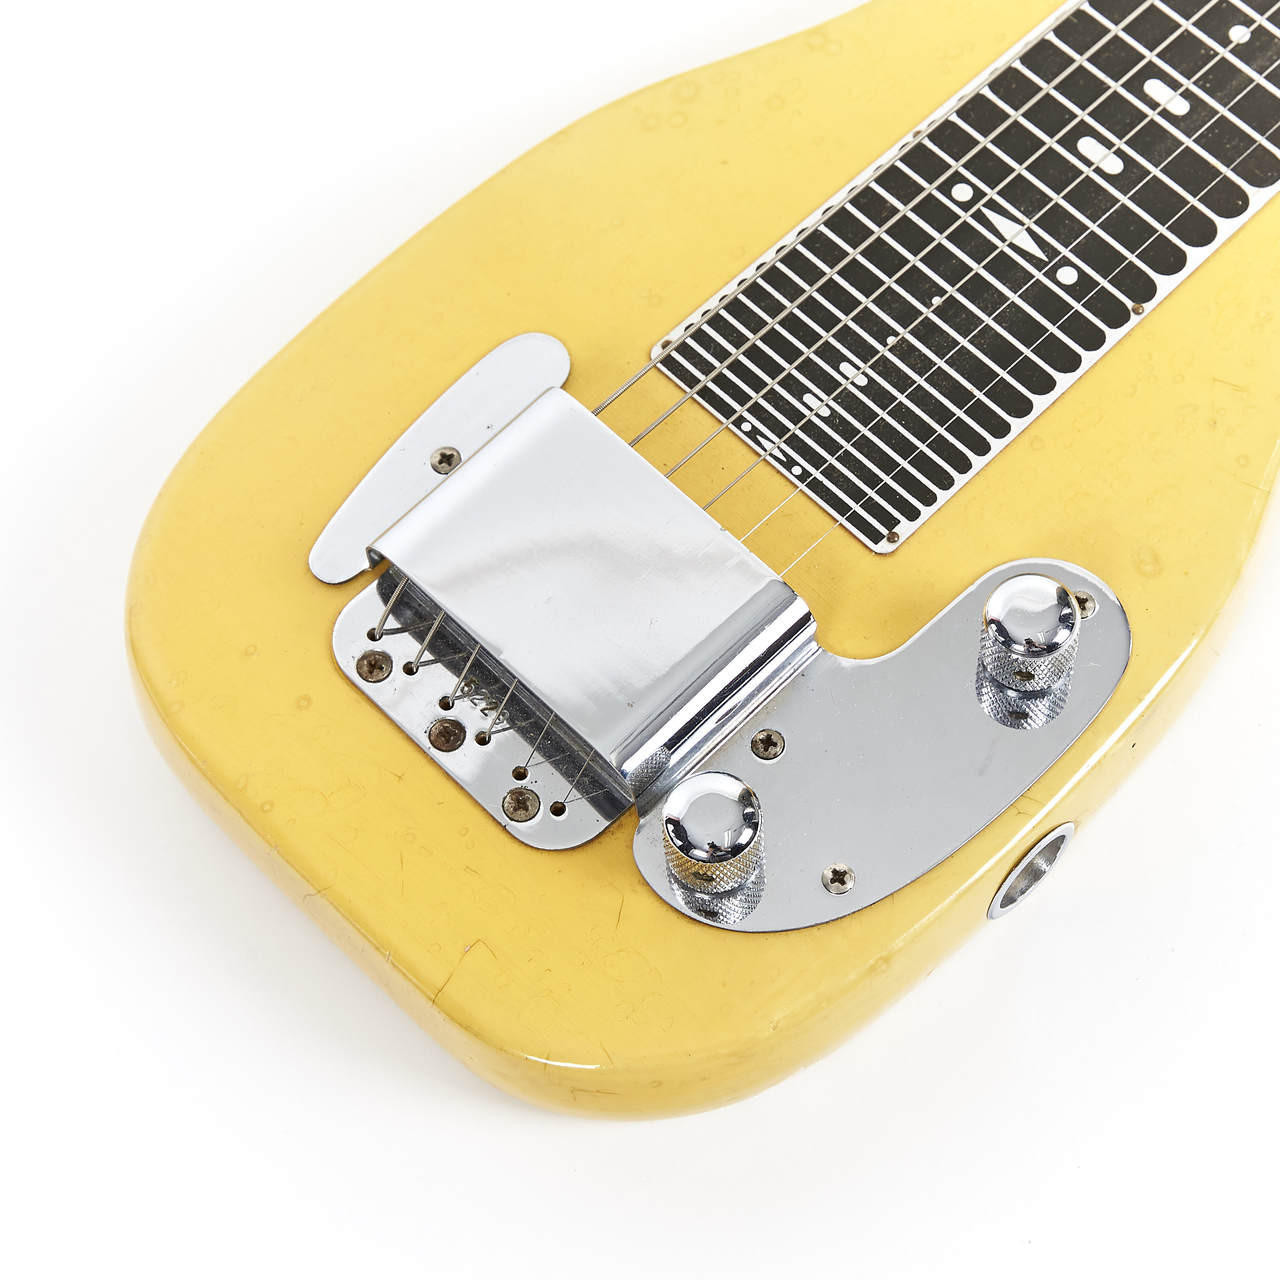 Mécaniques Yellow Part Classique platine nickel : Crystal Guitare